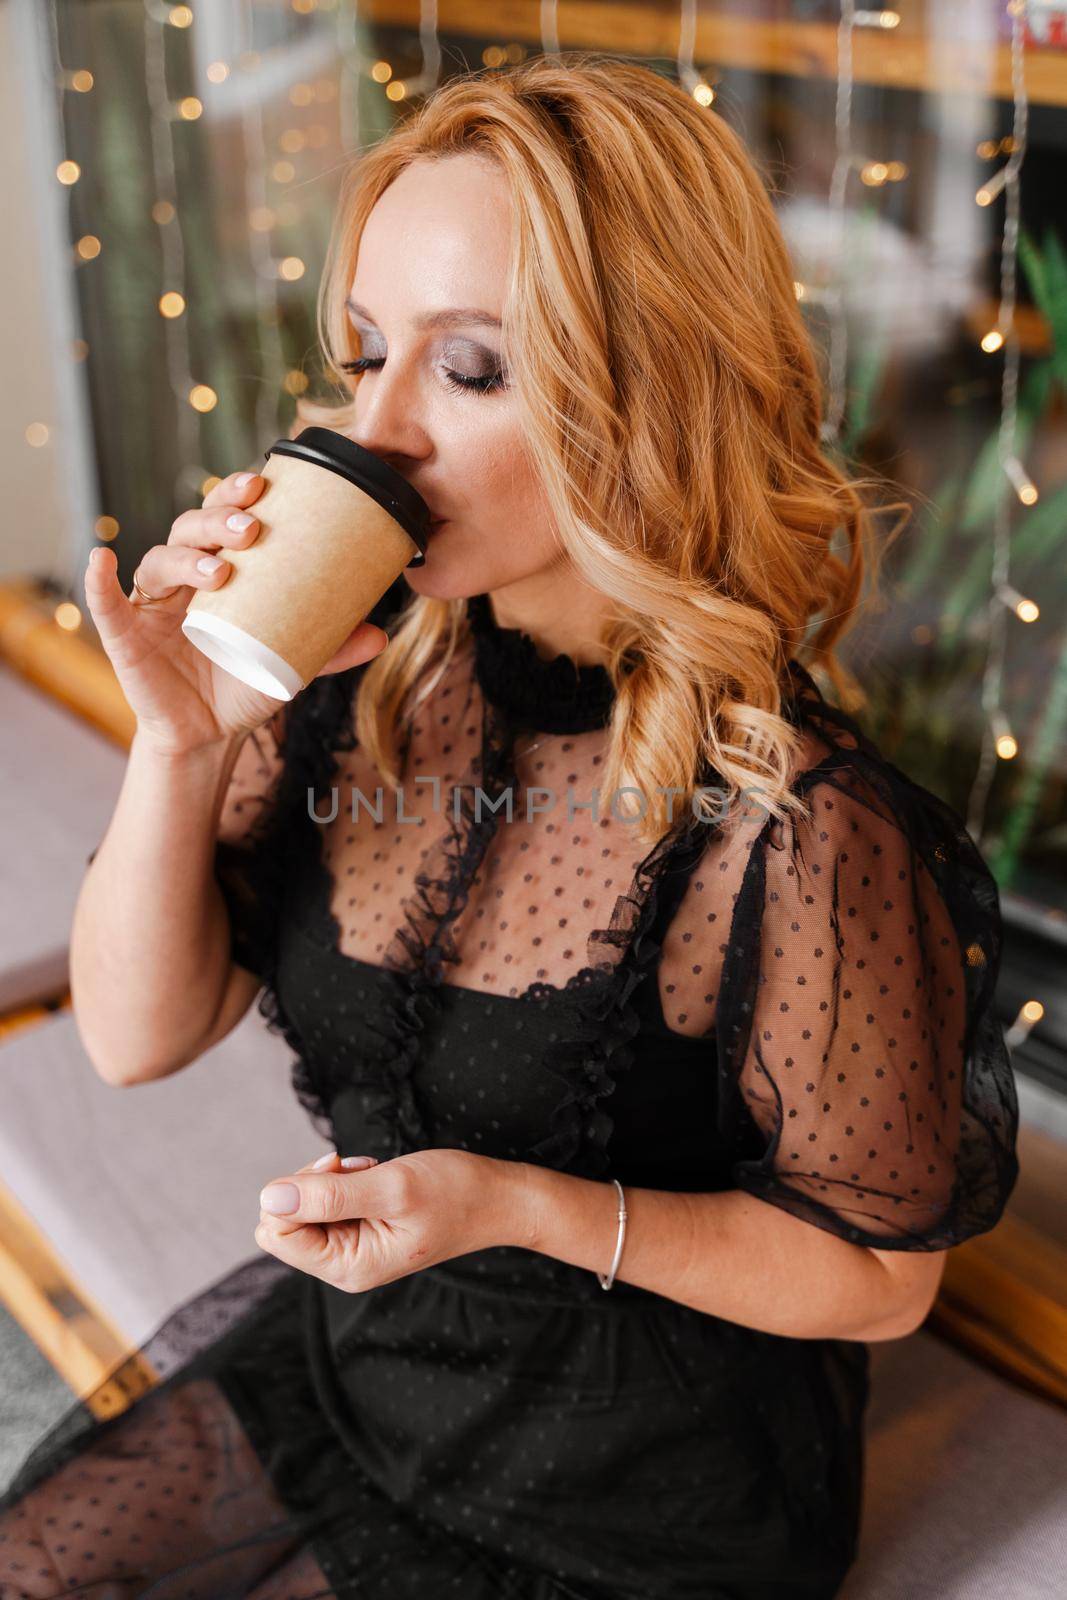 Young charming blonde with a cute smile and makeup while relaxing in a cafe. She is holding a cup of coffee in her hands. She is dressed in a black dress with transparent sleeves. by Matiunina